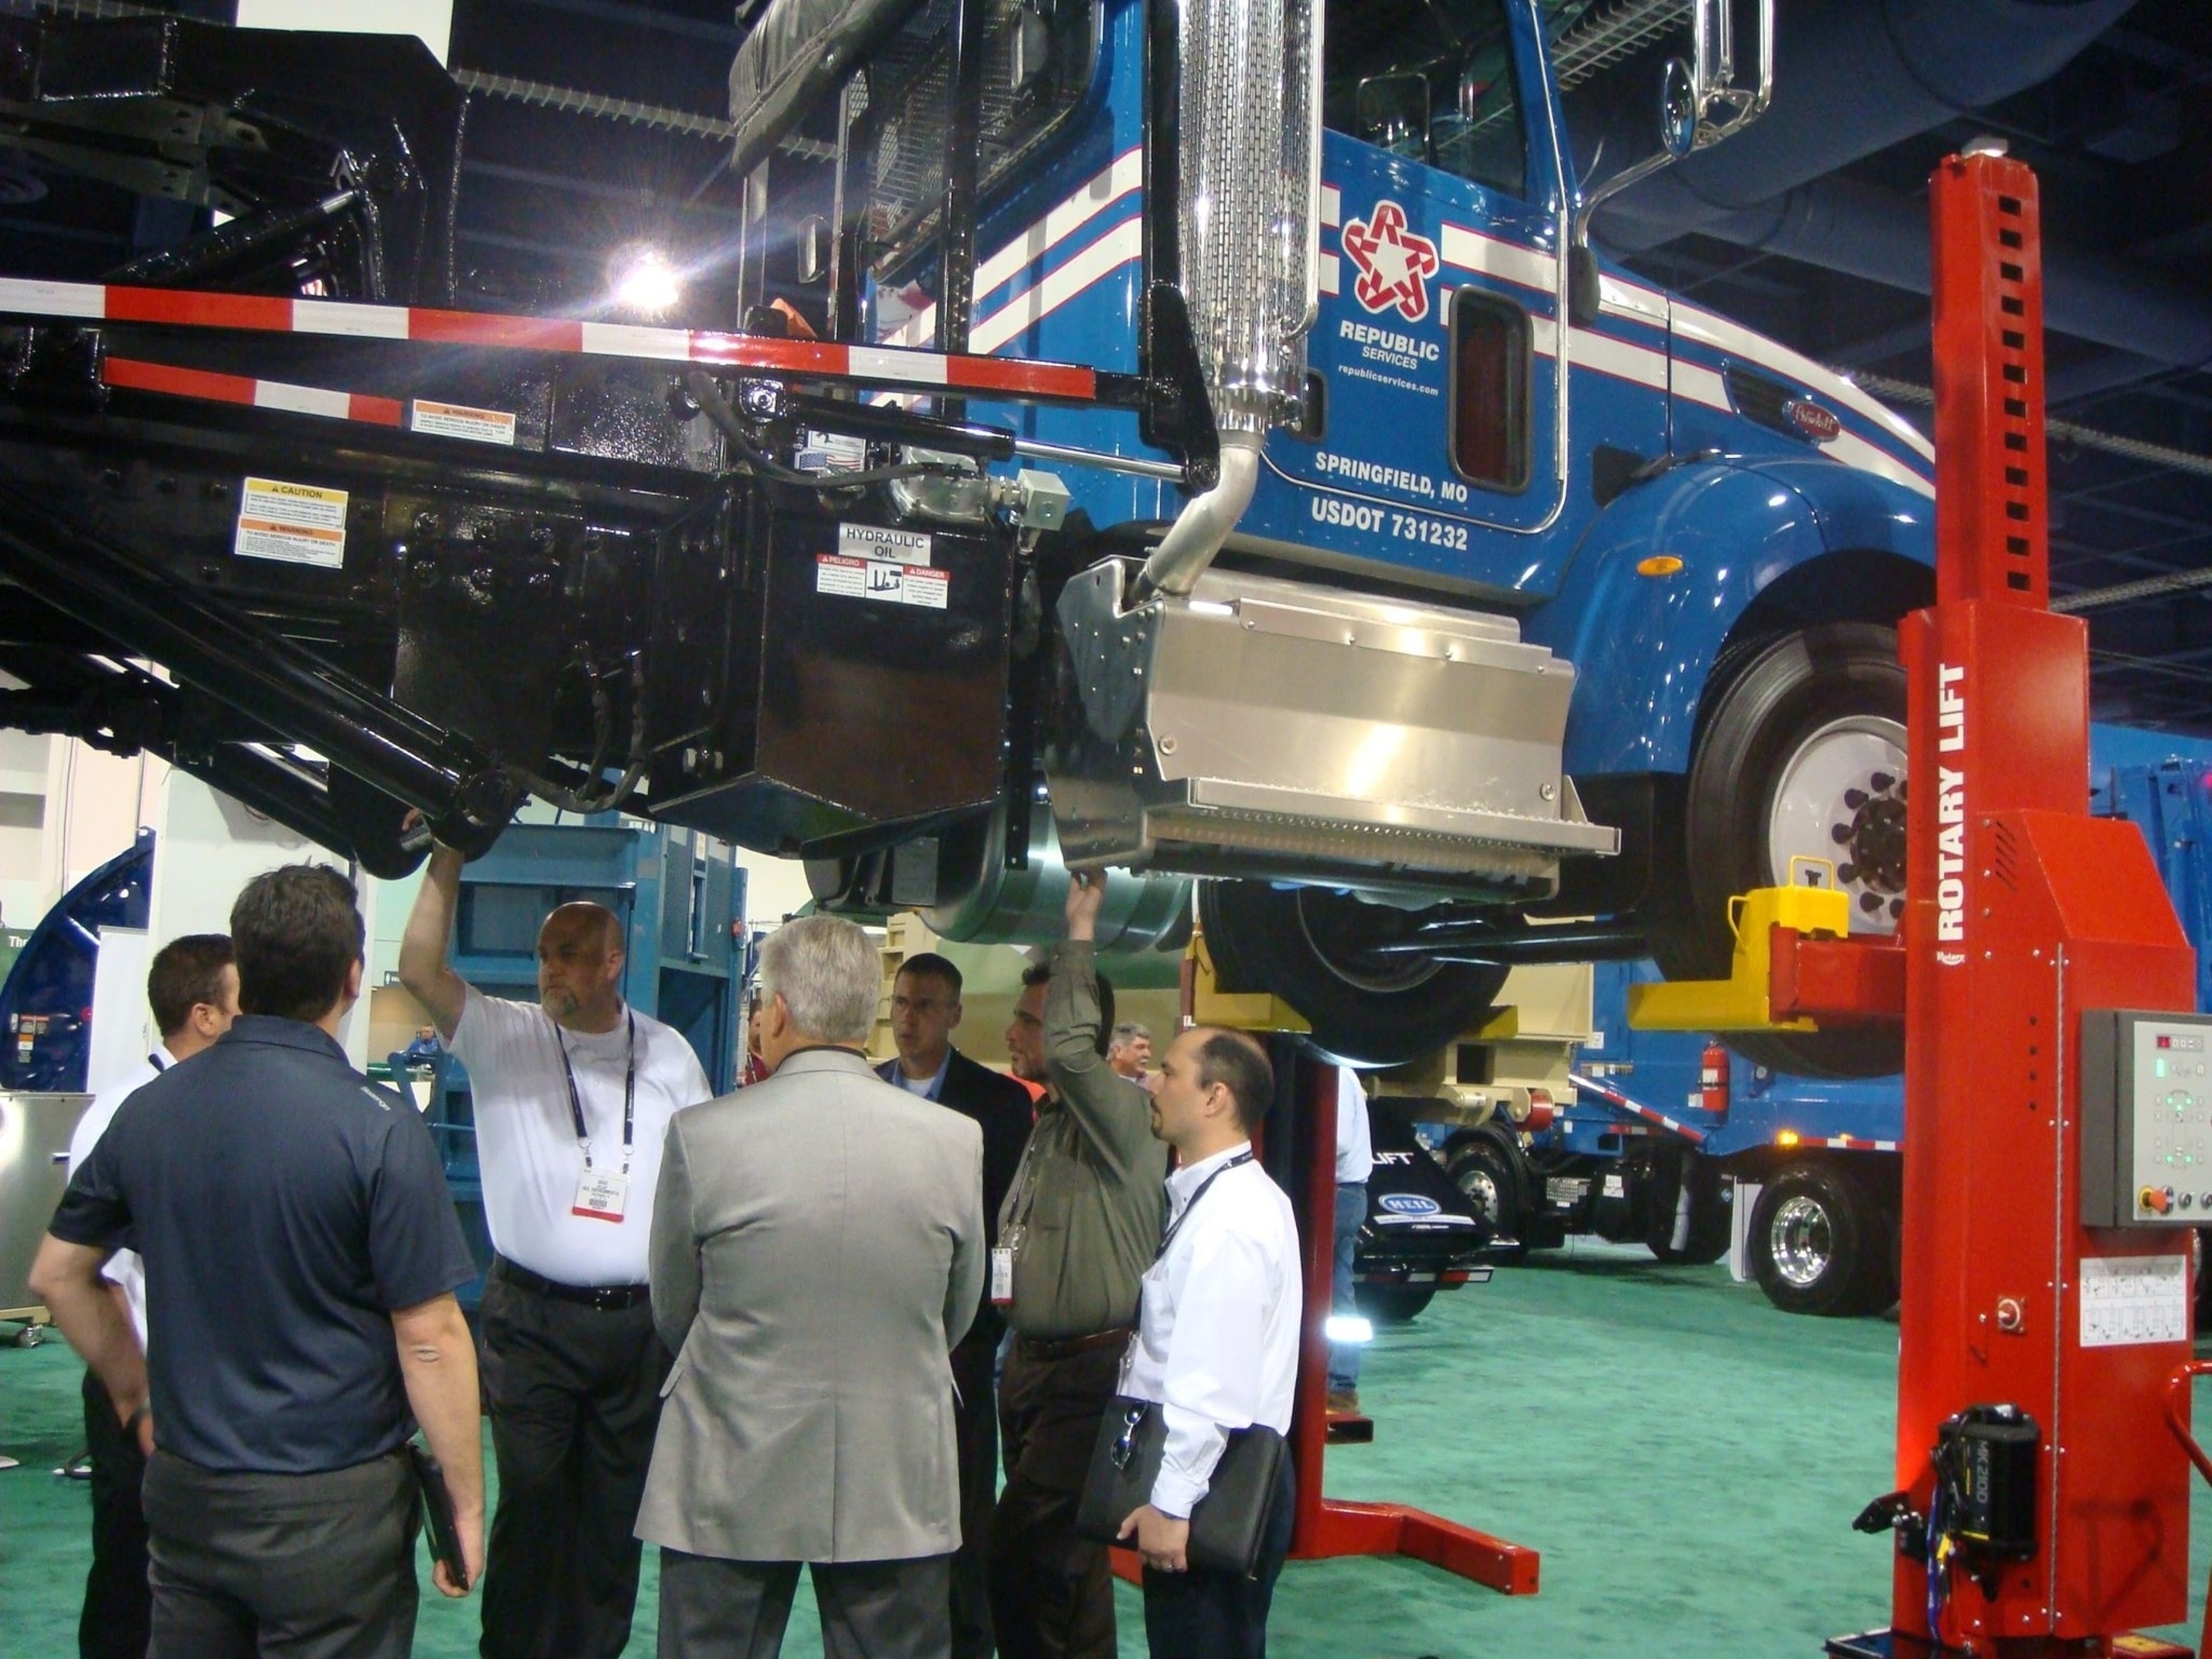 Rotary Lift’s timesaving Mach(TM) series mobile column lift will be on display in the new Rotary Lift booth (#341) at WasteExpo 2014 in Atlanta. (PRNewsFoto/Rotary Lift)